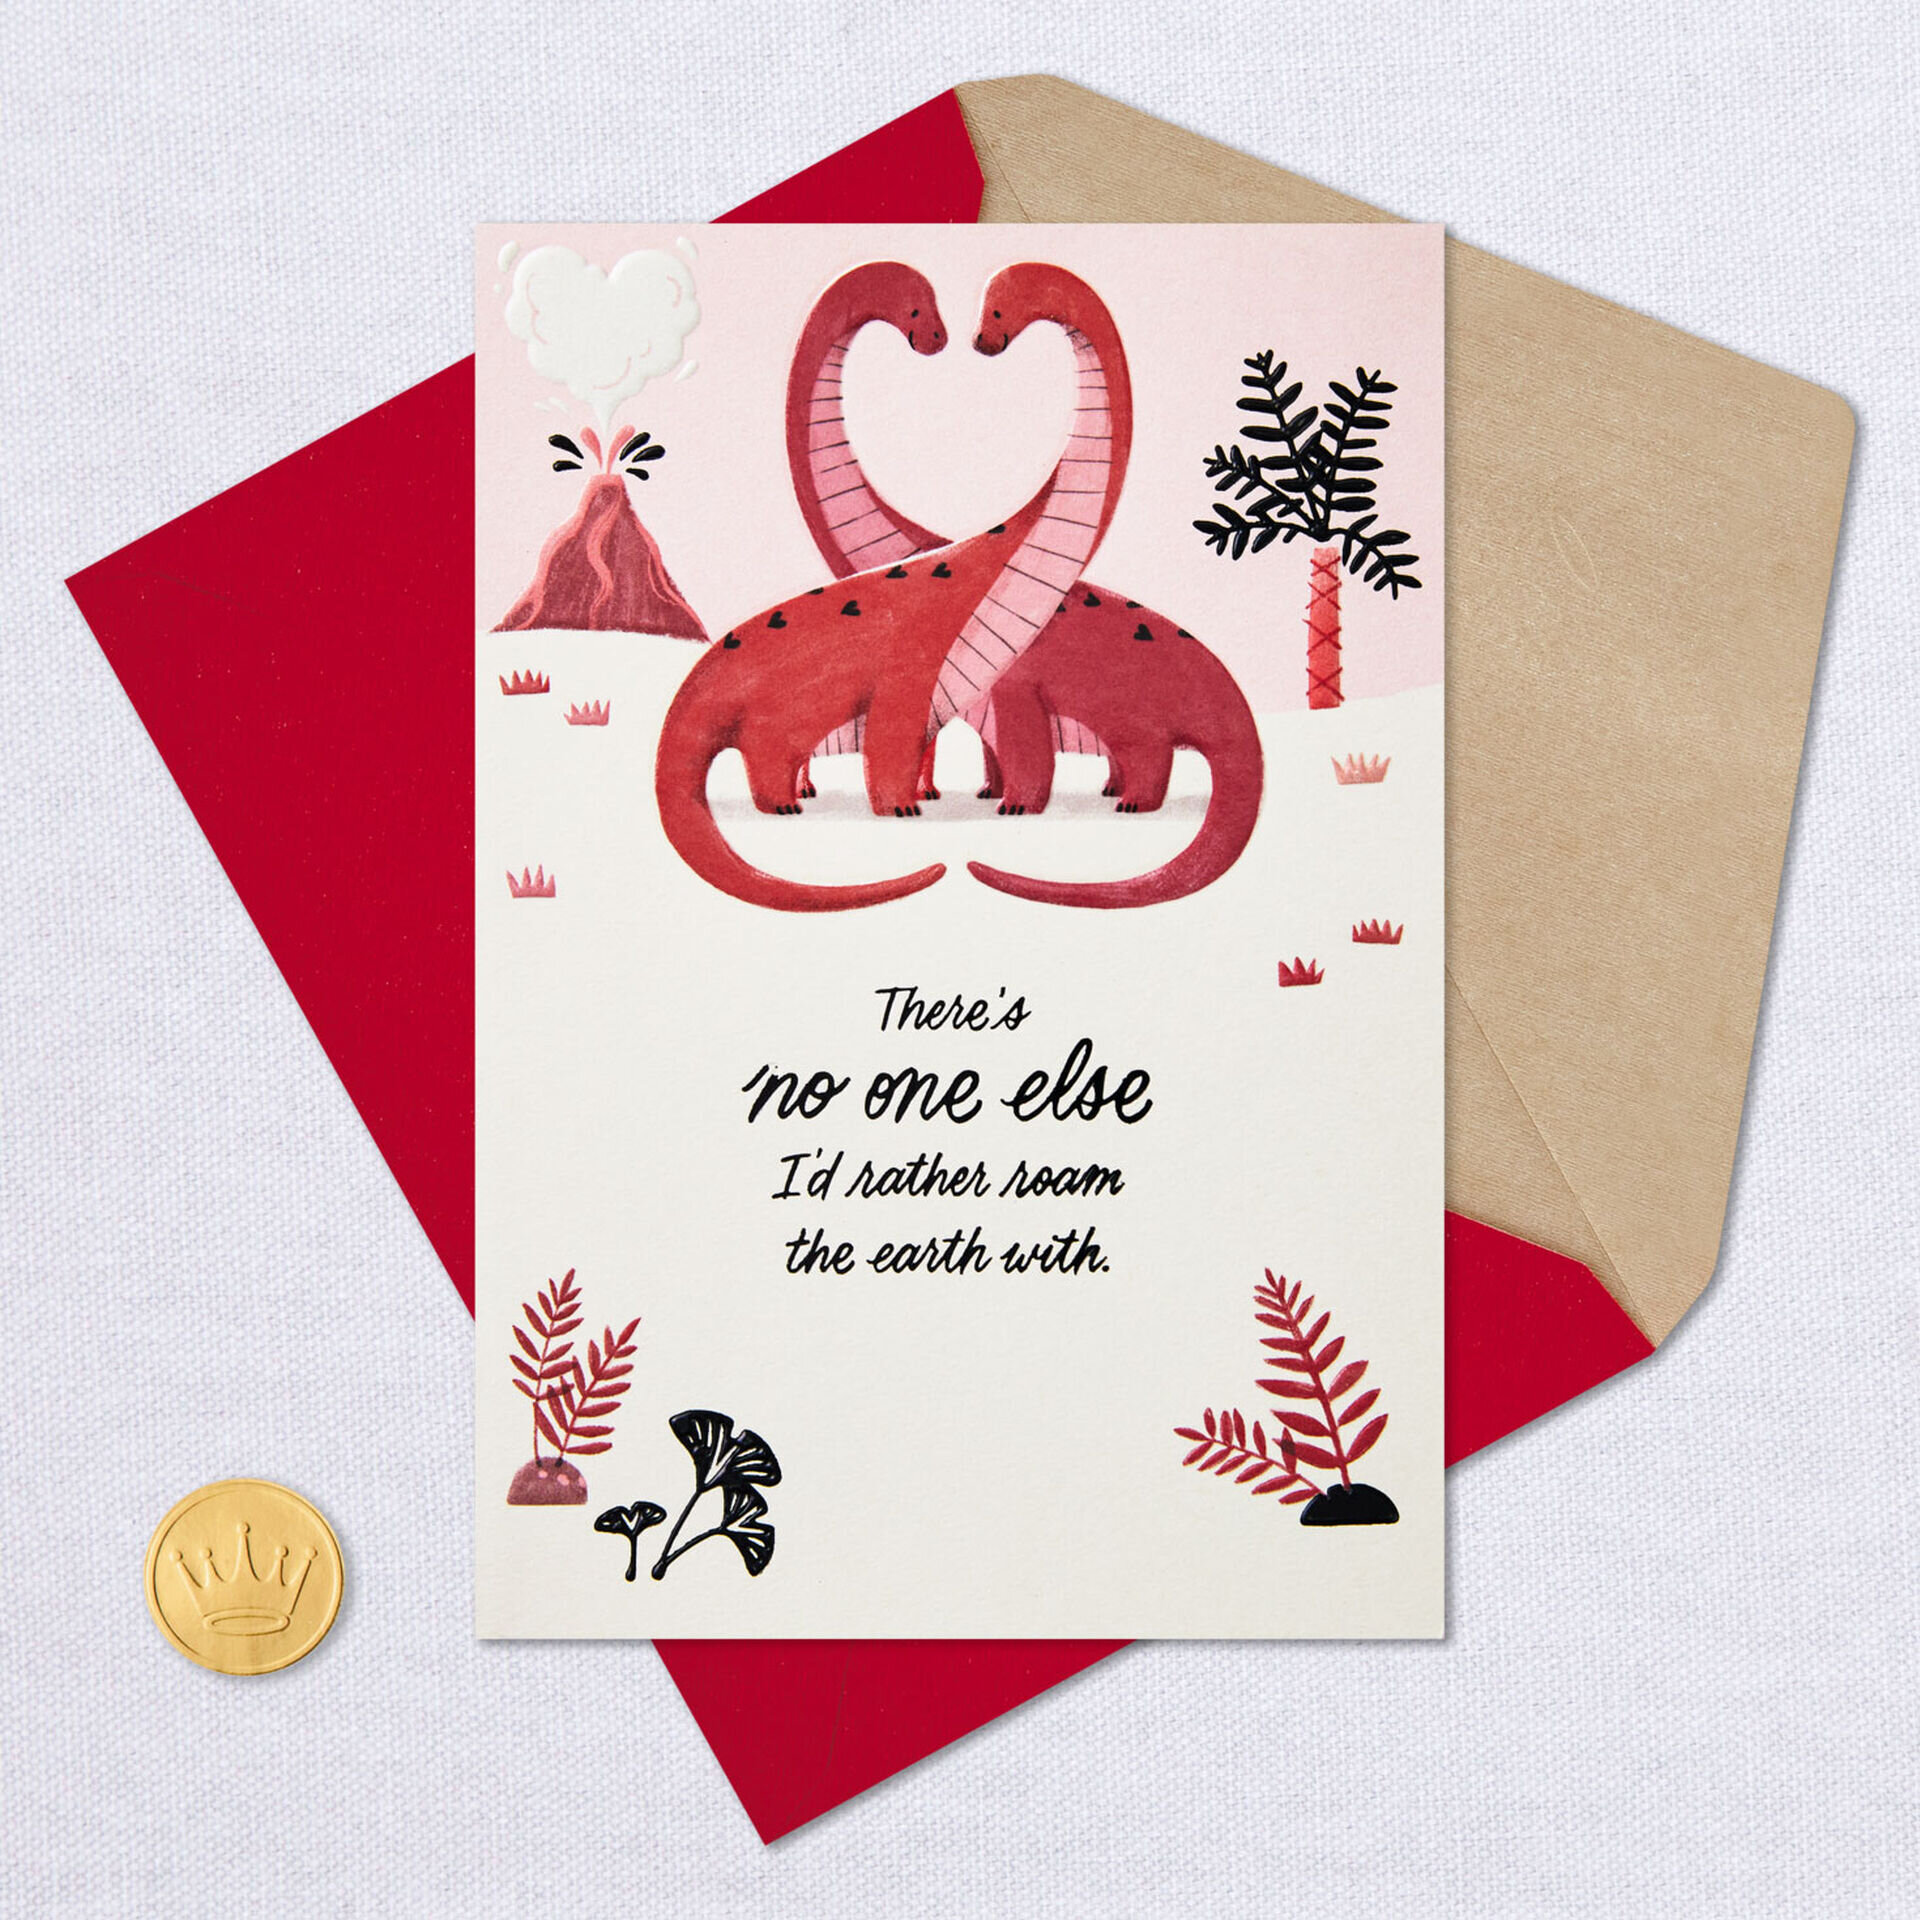 Two-Dinosaurs-Romantic-PopUp-Valentines-Day-Card_499VEE7242_05.jpg